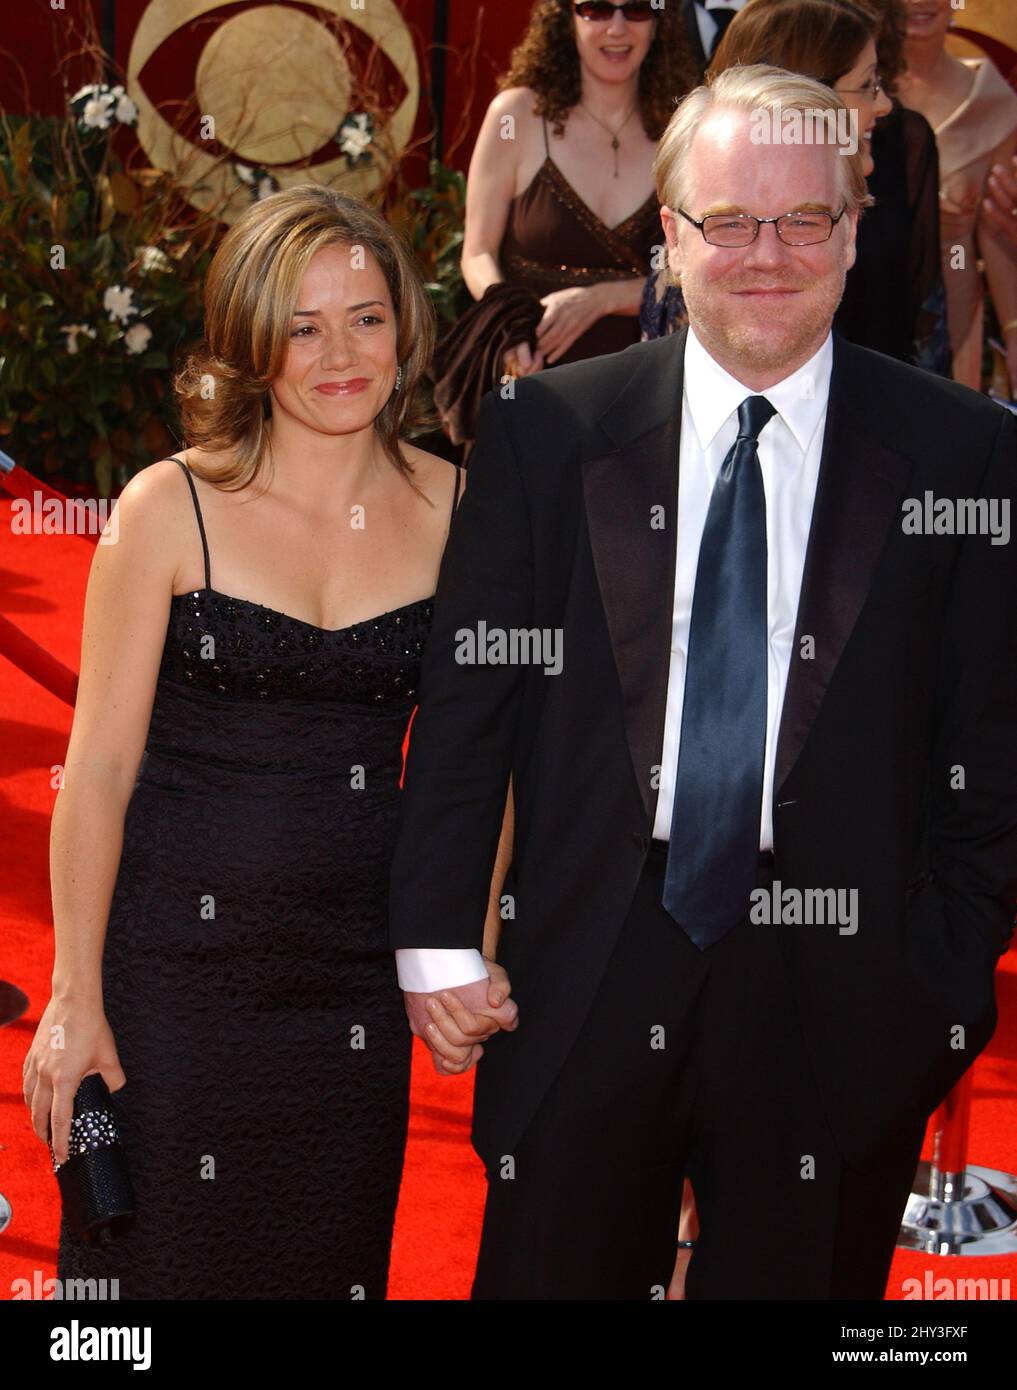 September 18, 2005 Los Angeles, Ca. Philip Seymour Hoffman THE 57th Annual Primetime EMMY Awards Held At The Shrine Auditorium Stock Photo